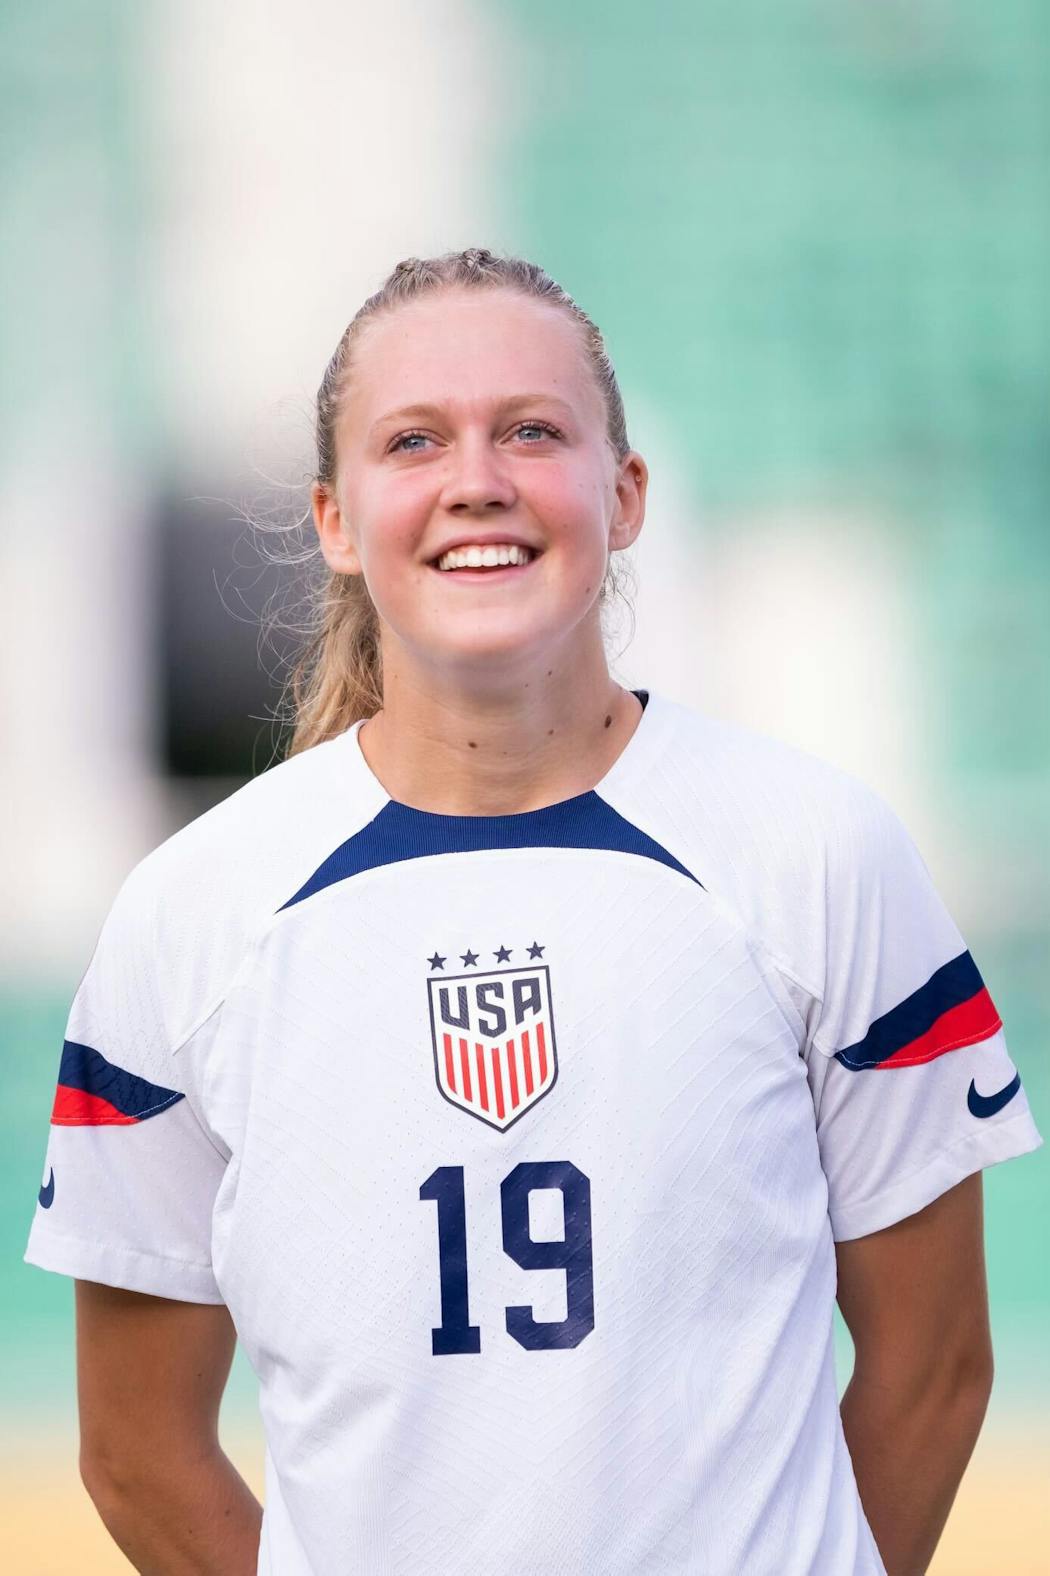 Maddie Dahlien hopes to wear a similar Team USA jersey someday for the senior team. 